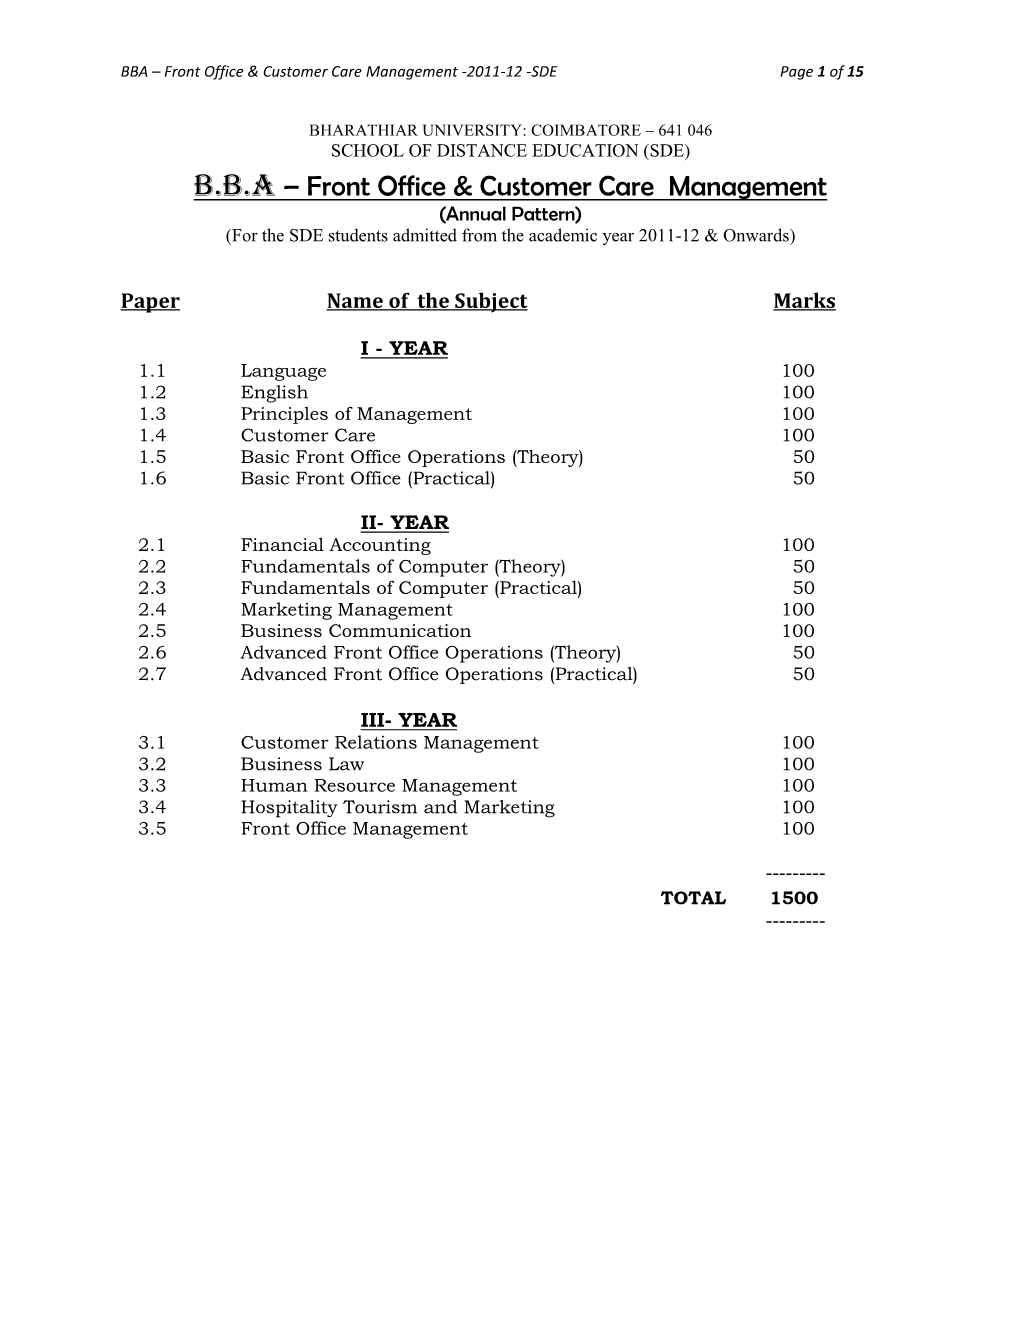 B.B.A – Front Office & Customer Care Management